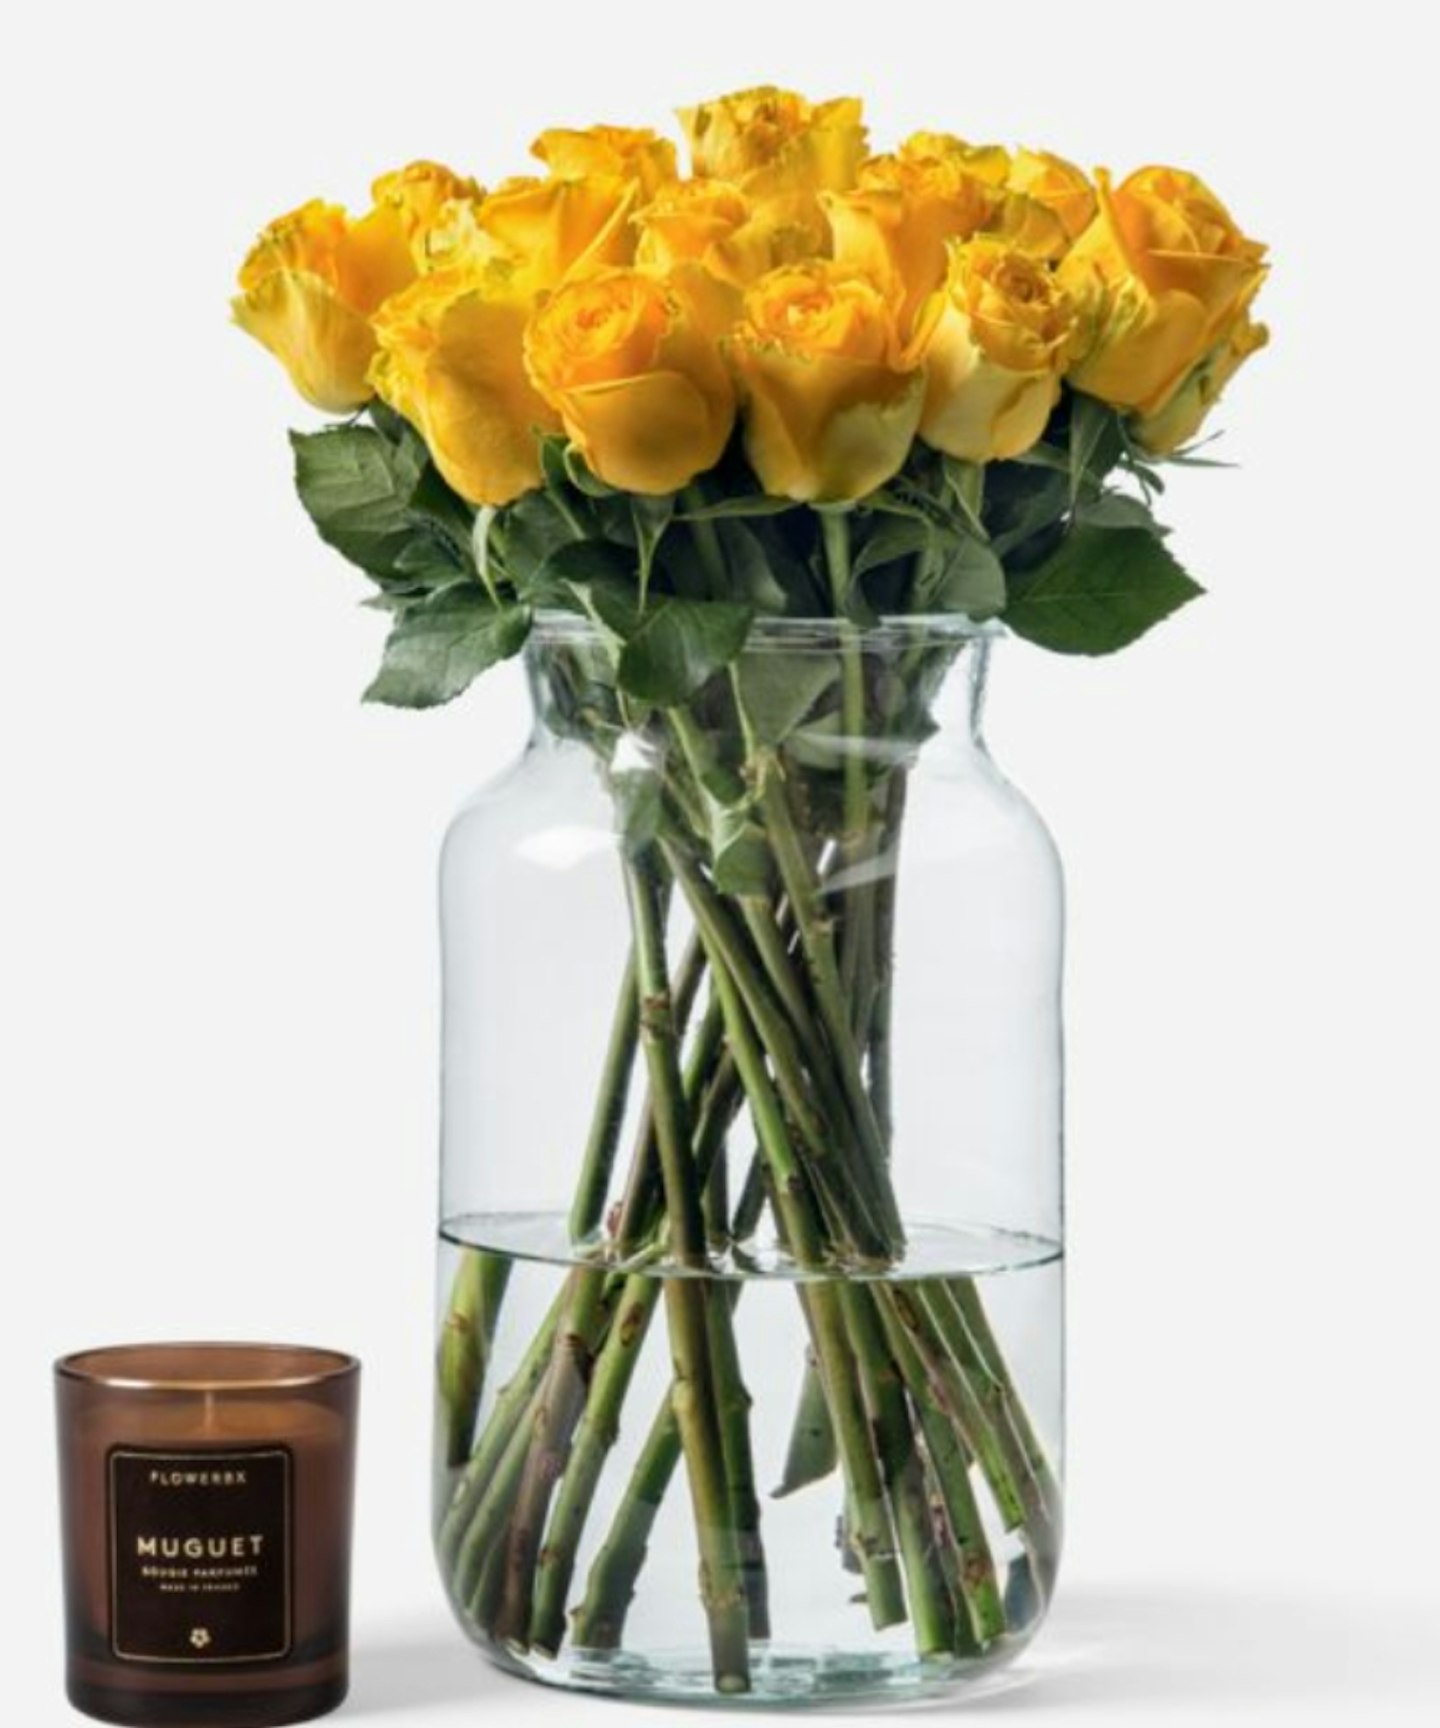 International Women's Day gifts FlowerBx, Yellow Flowers (Donation to: Women Supporting Women Campaign)